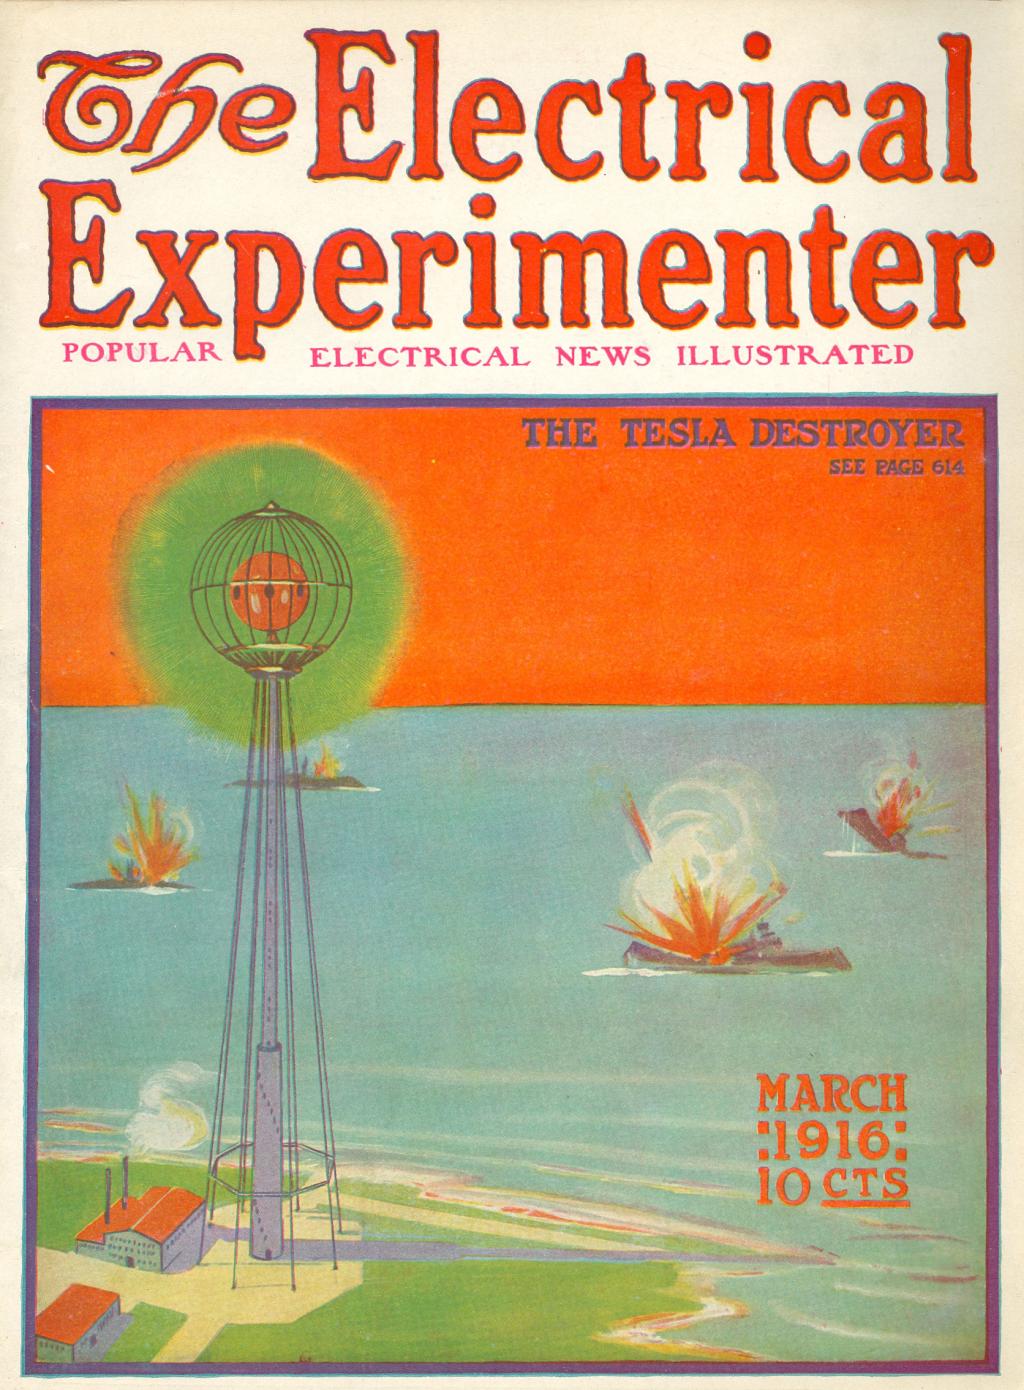 Cover of Electrical Experimenter March 1916 depicting The Tesla Destroyer